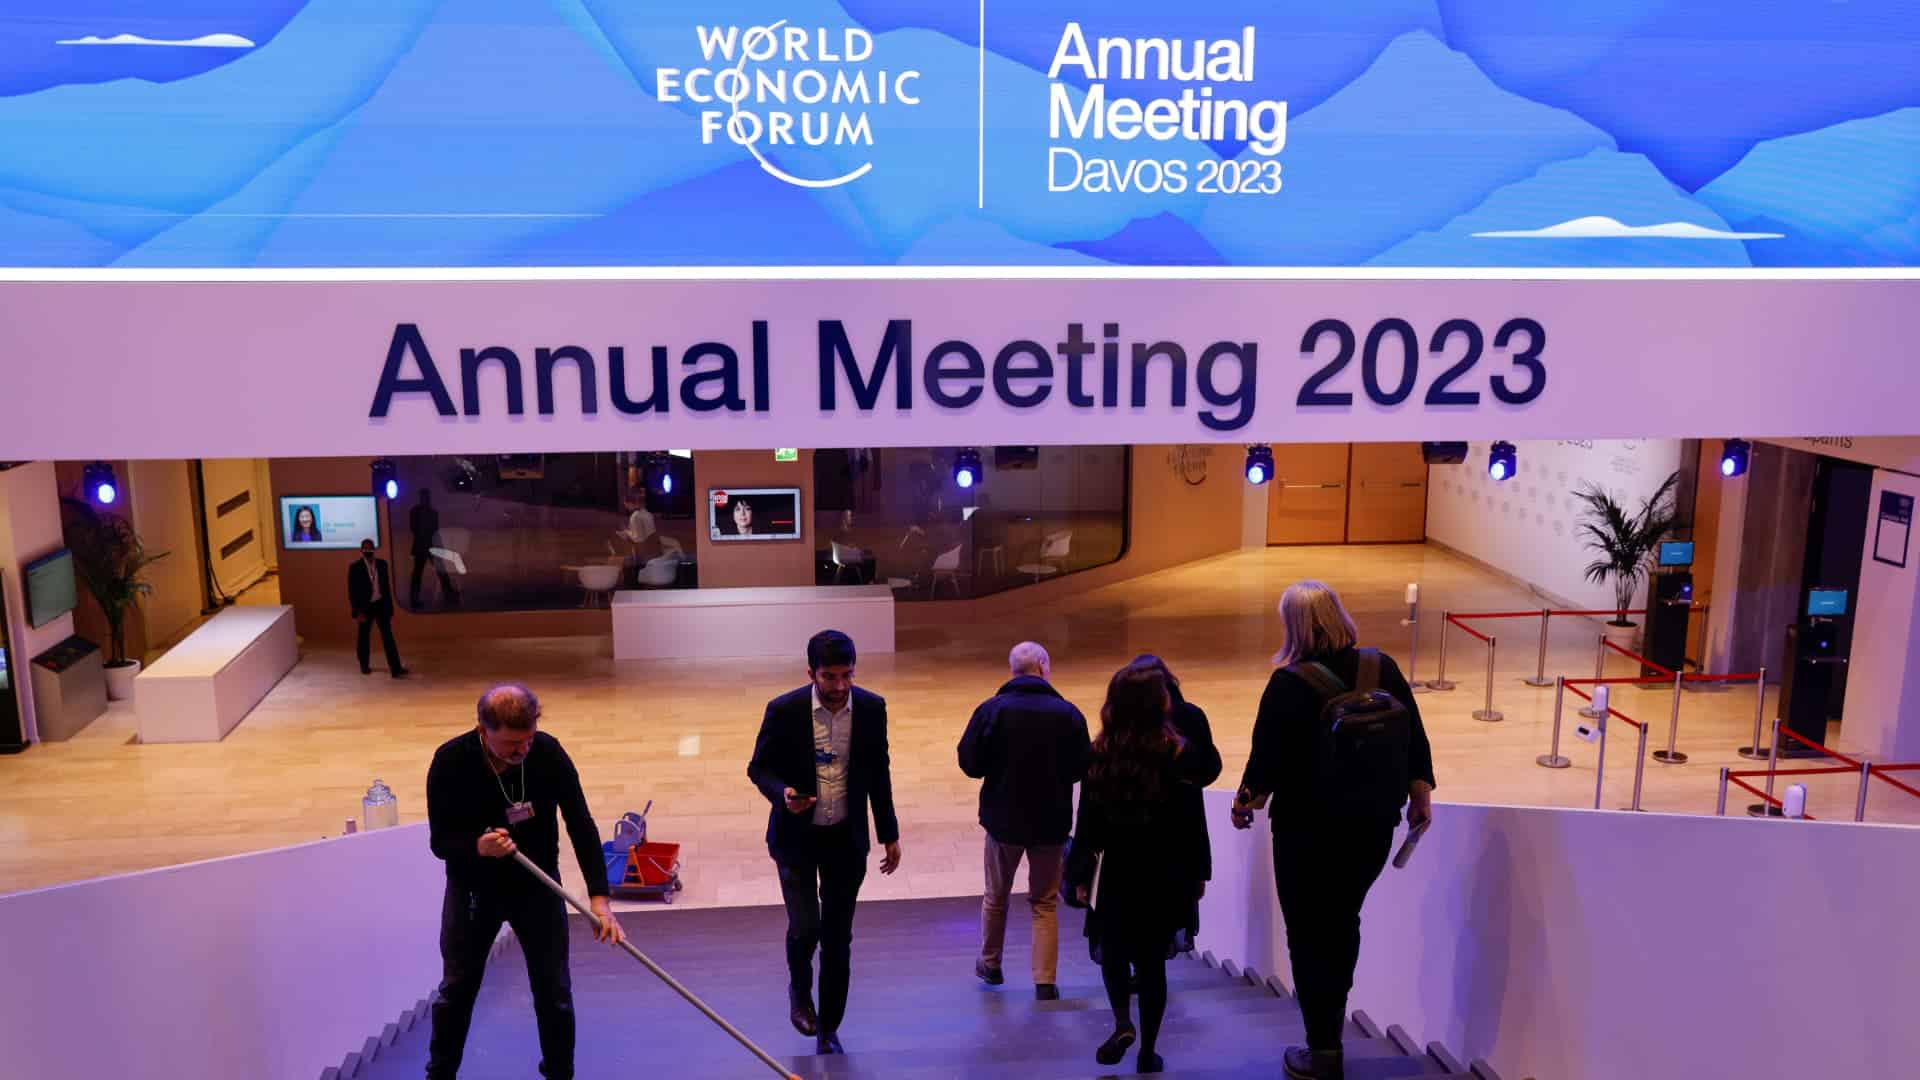 European markets head for lower open as economic concerns dominate Davos